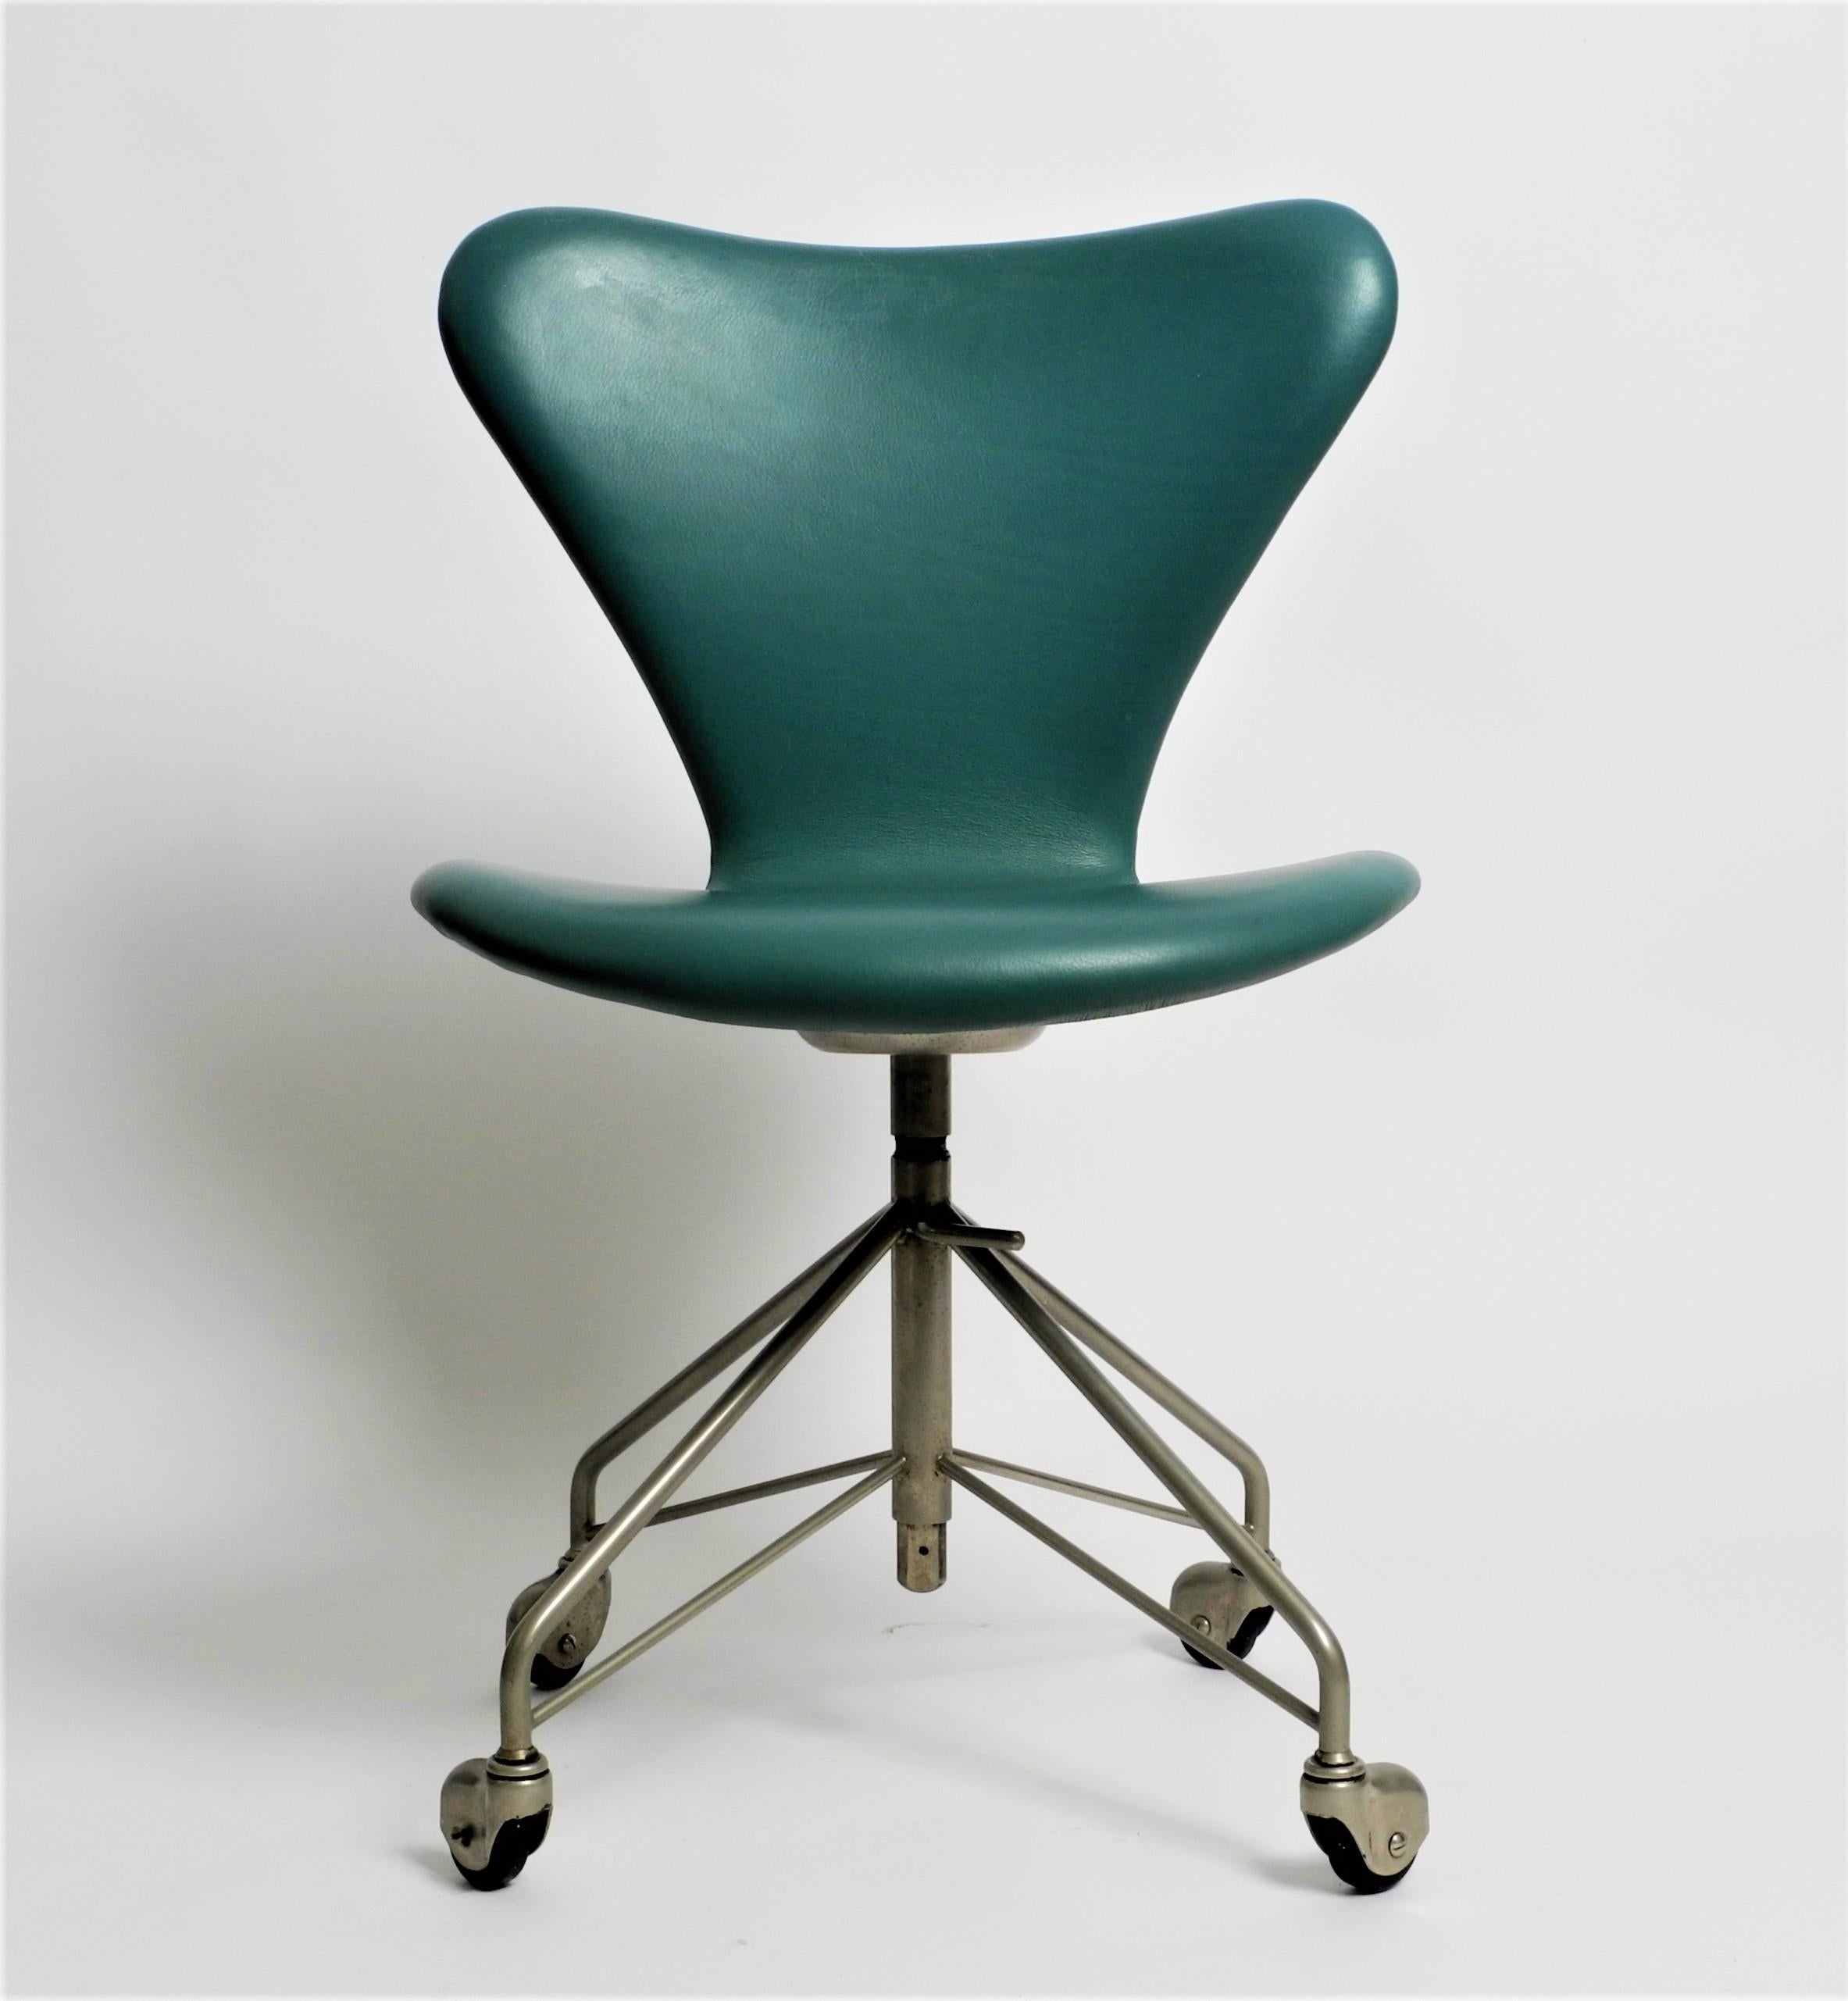 Early Mid-Century Modern office chair model 3117 with the rare four rolls base and adjustable height. Designed by Arne Jacobsen for Fritz Hansen. Produced arround 1960.

Executed in turquoise vinyl and chrome-plated steel.

Dimensions:
H 30.7 -